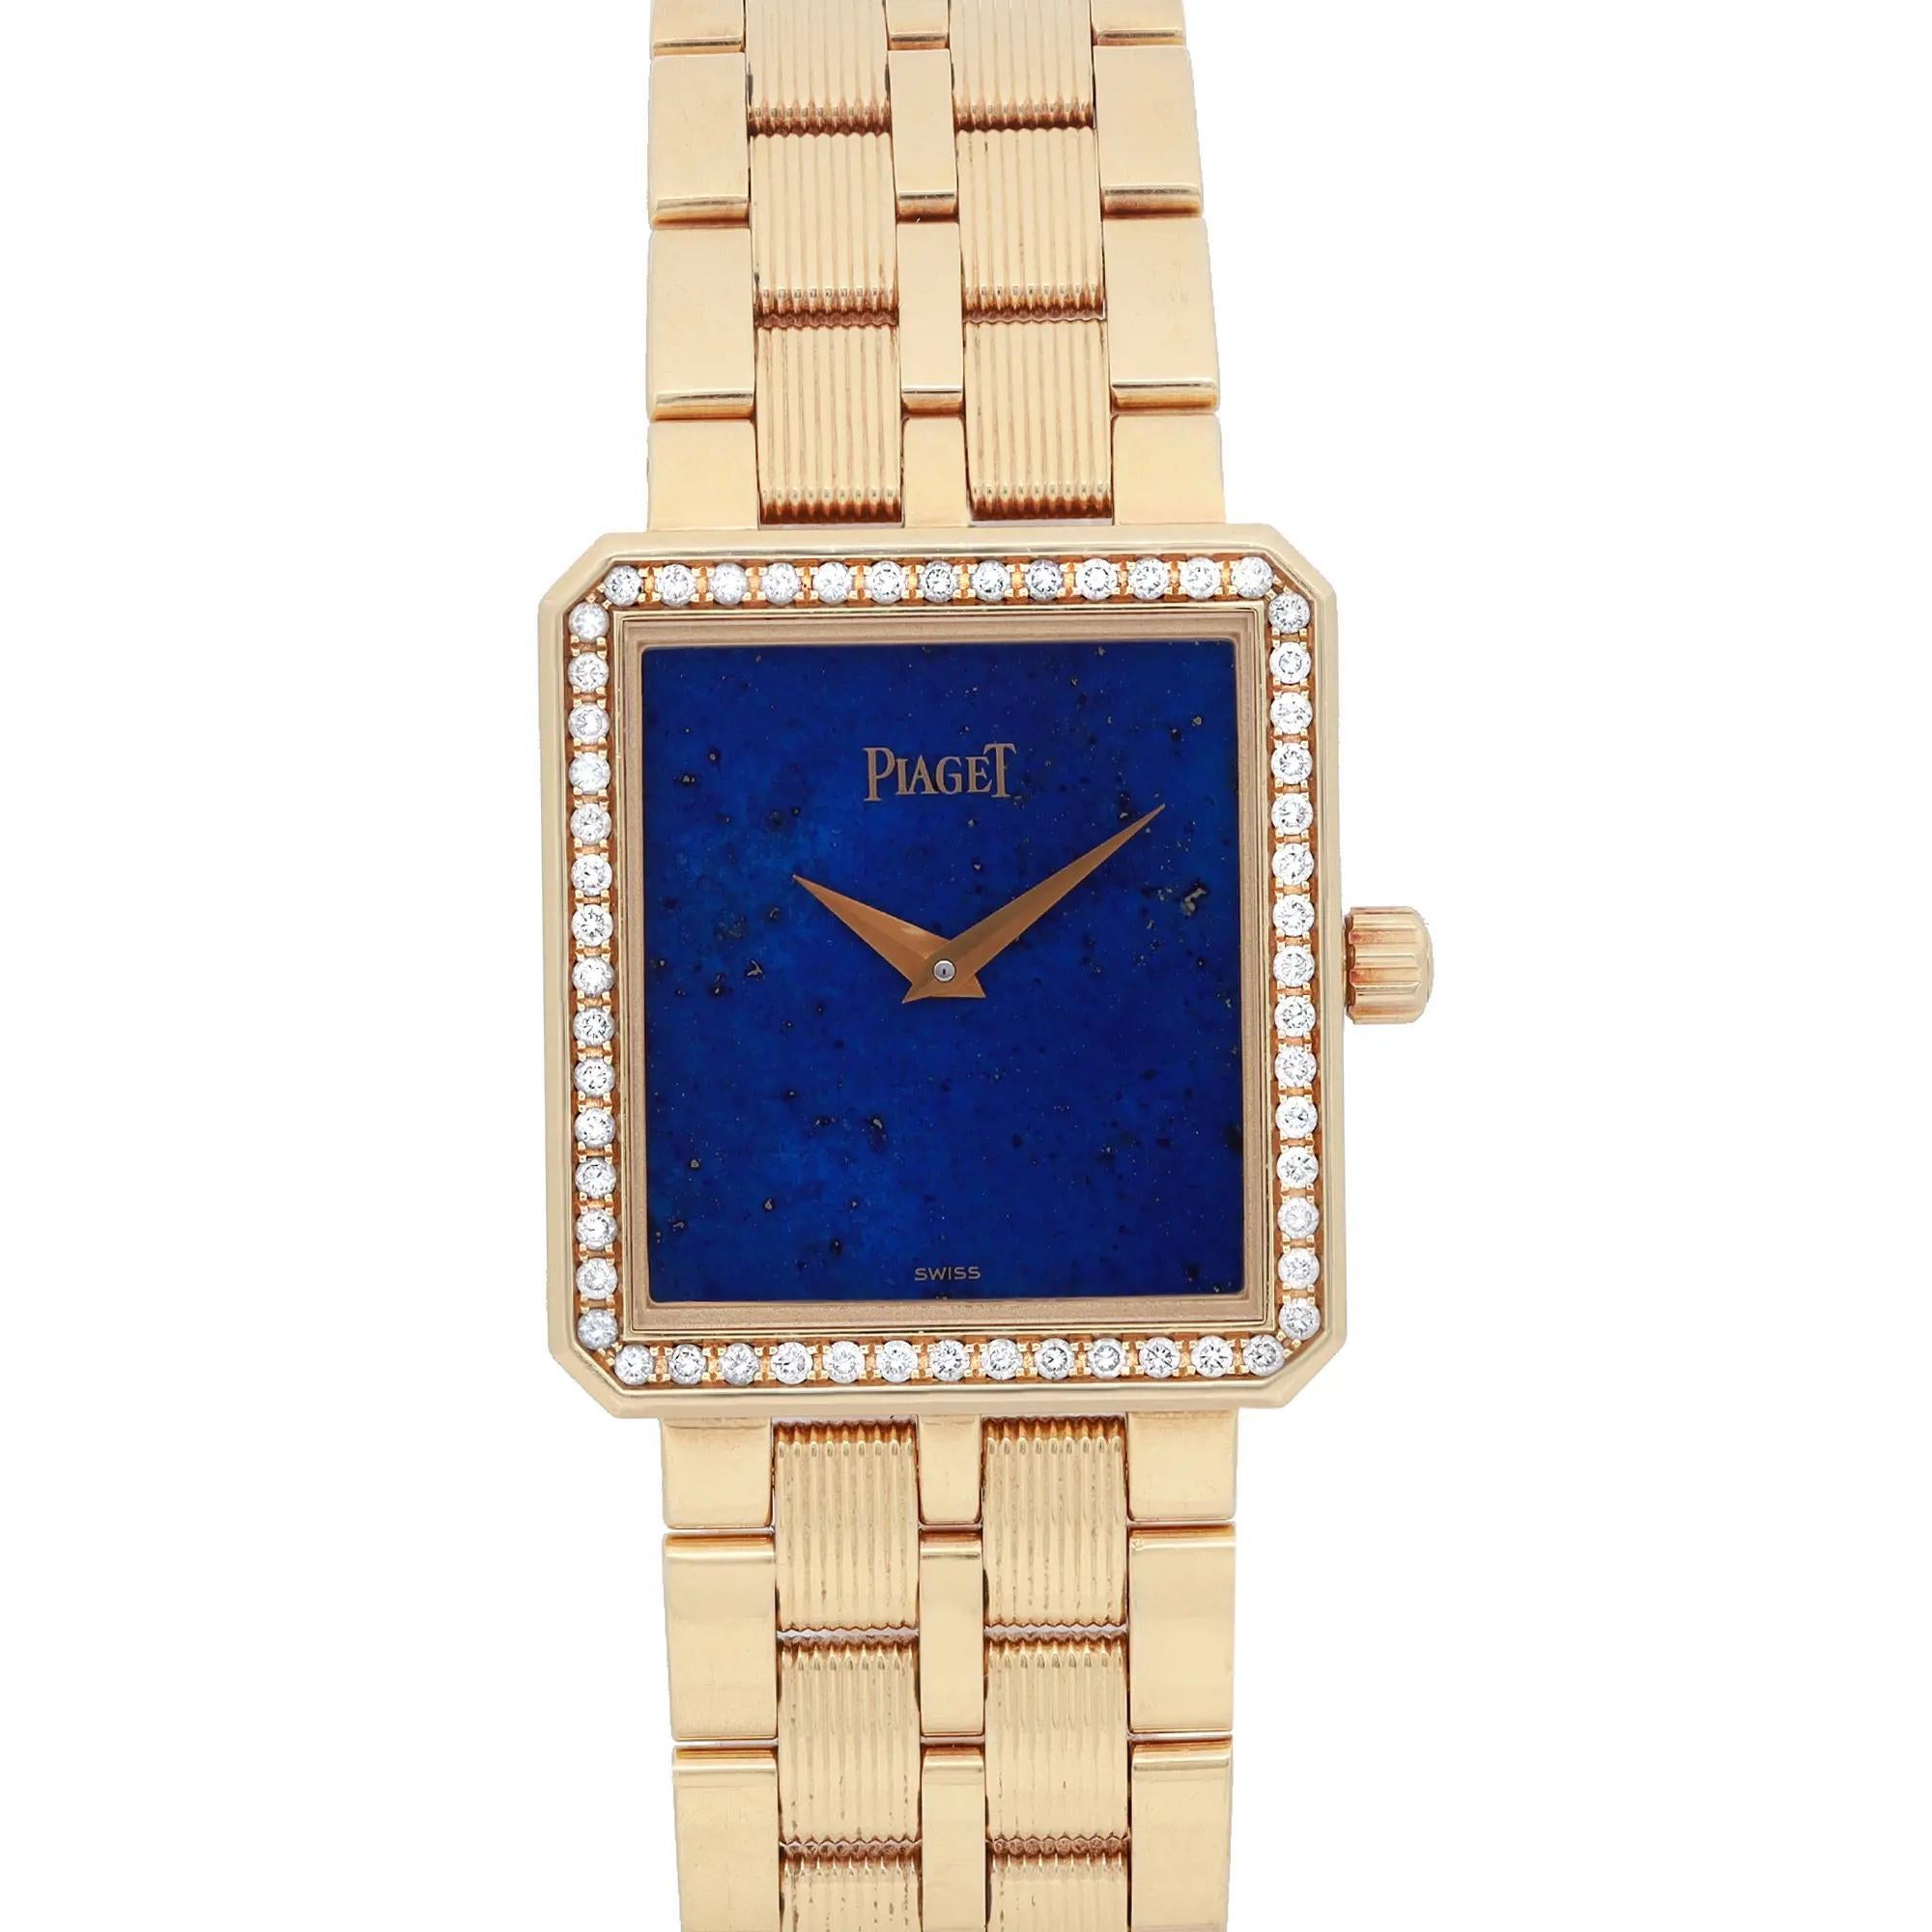 This beautiful vintage timepiece is in good condition. No original box and papers. wrist fit 7 Inches. Covered by 2 years Chonostore warranty.

Type: Wristwatch  Department: Unisex Adult  Model Number: 50155 M601D  Country/Region of Manufacture: